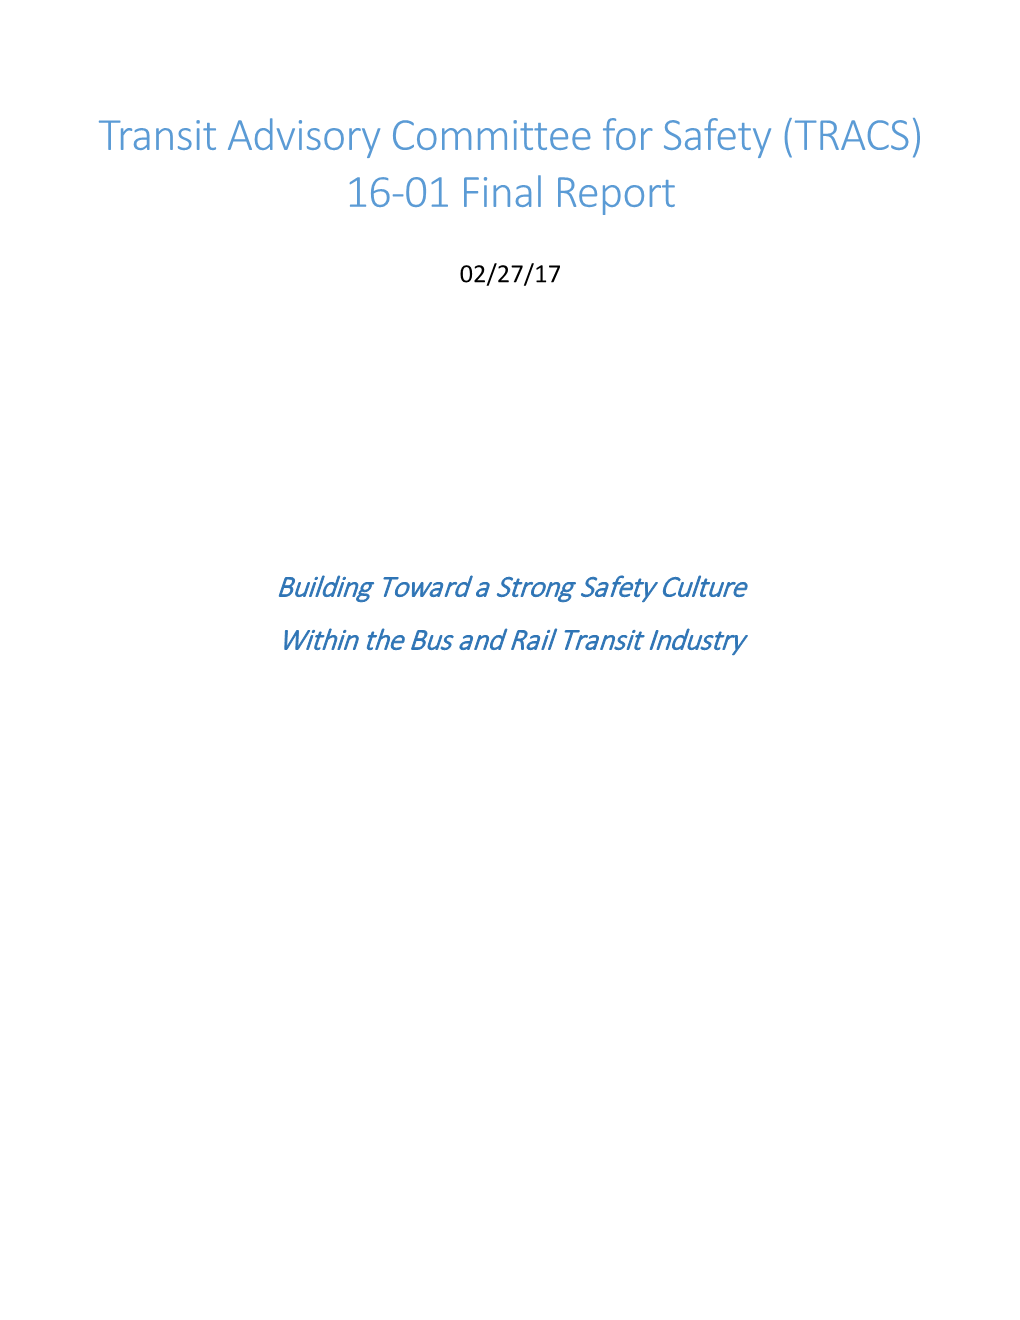 Building Toward a Strong Safety Culture (TRACS 16-01 Final Report)